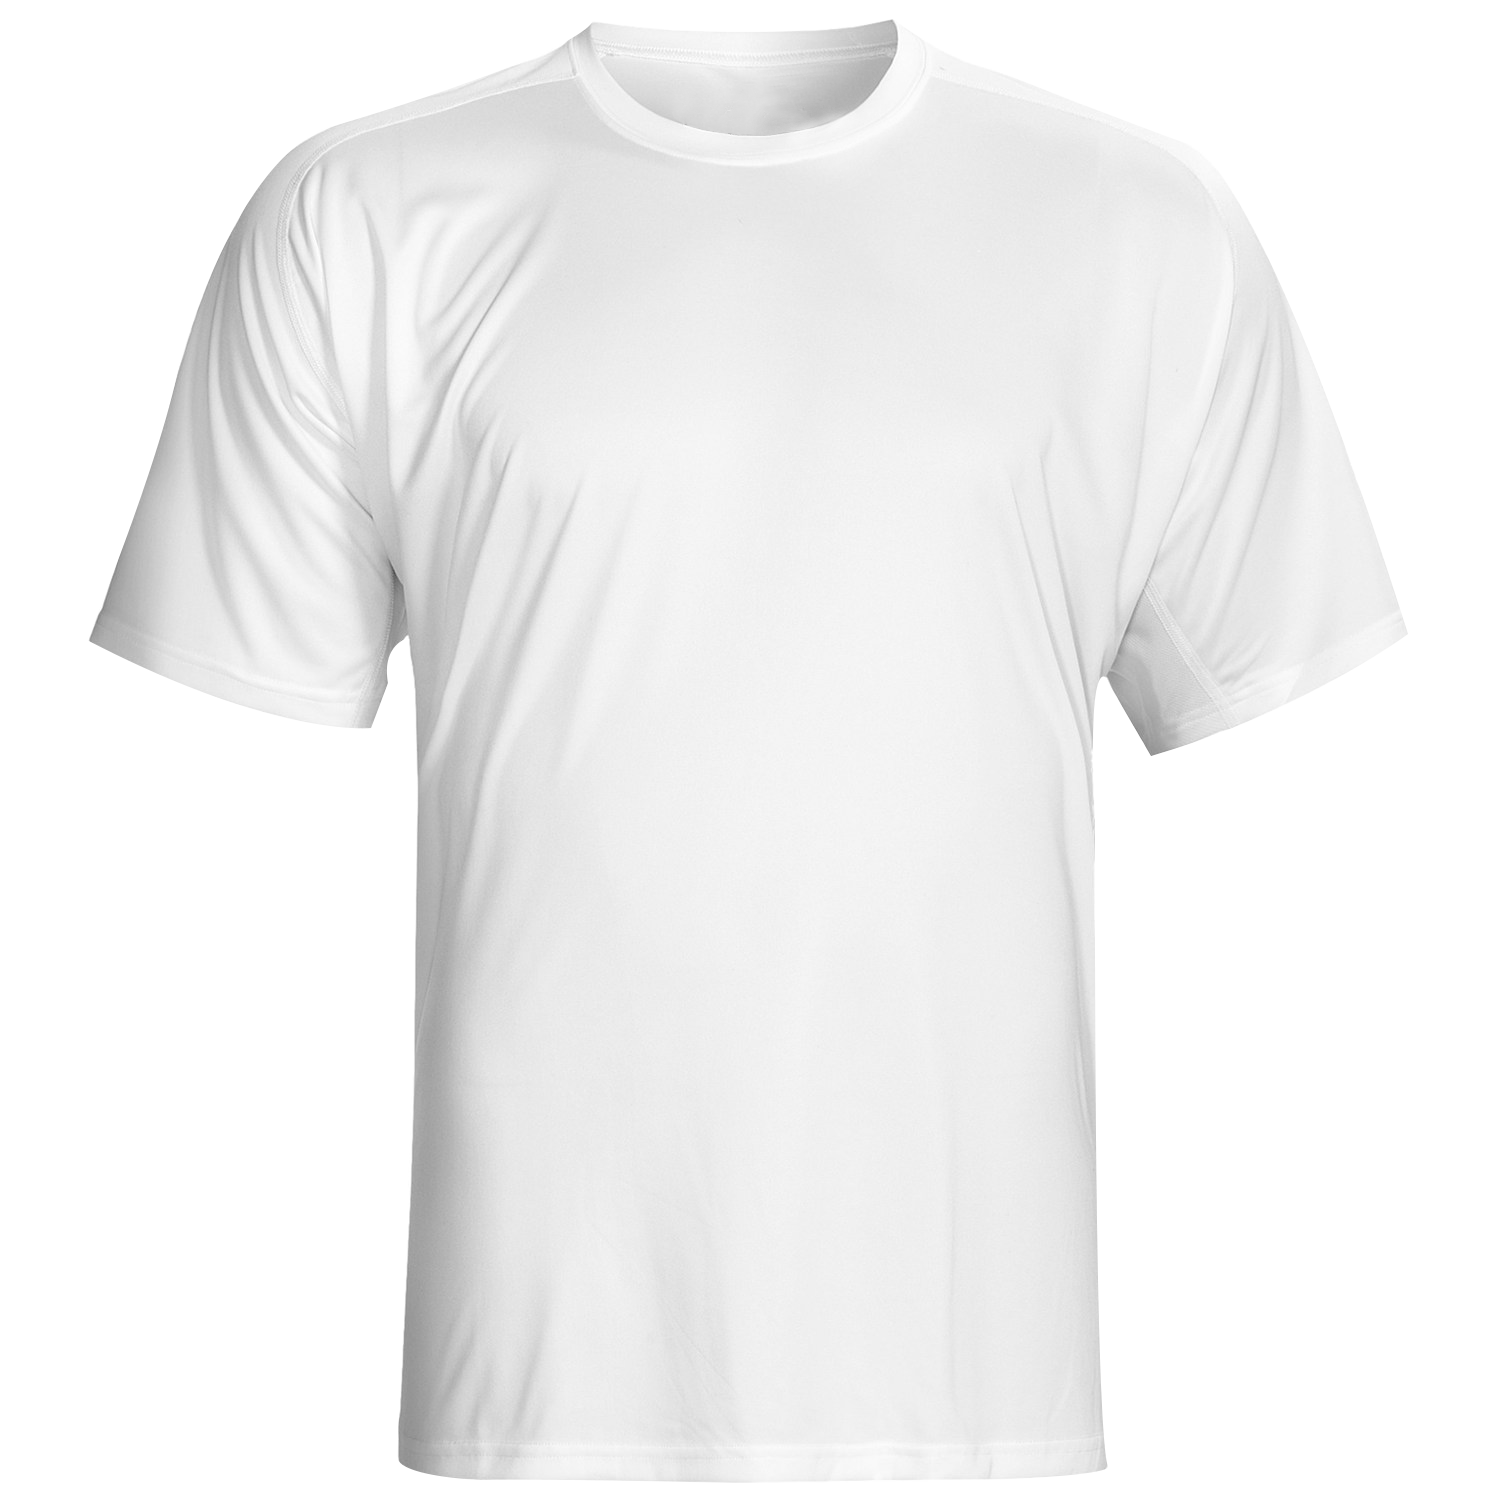 Wholesale Dri Fit Tee Shirts Manufacturer and Supplier, Factory | Gift